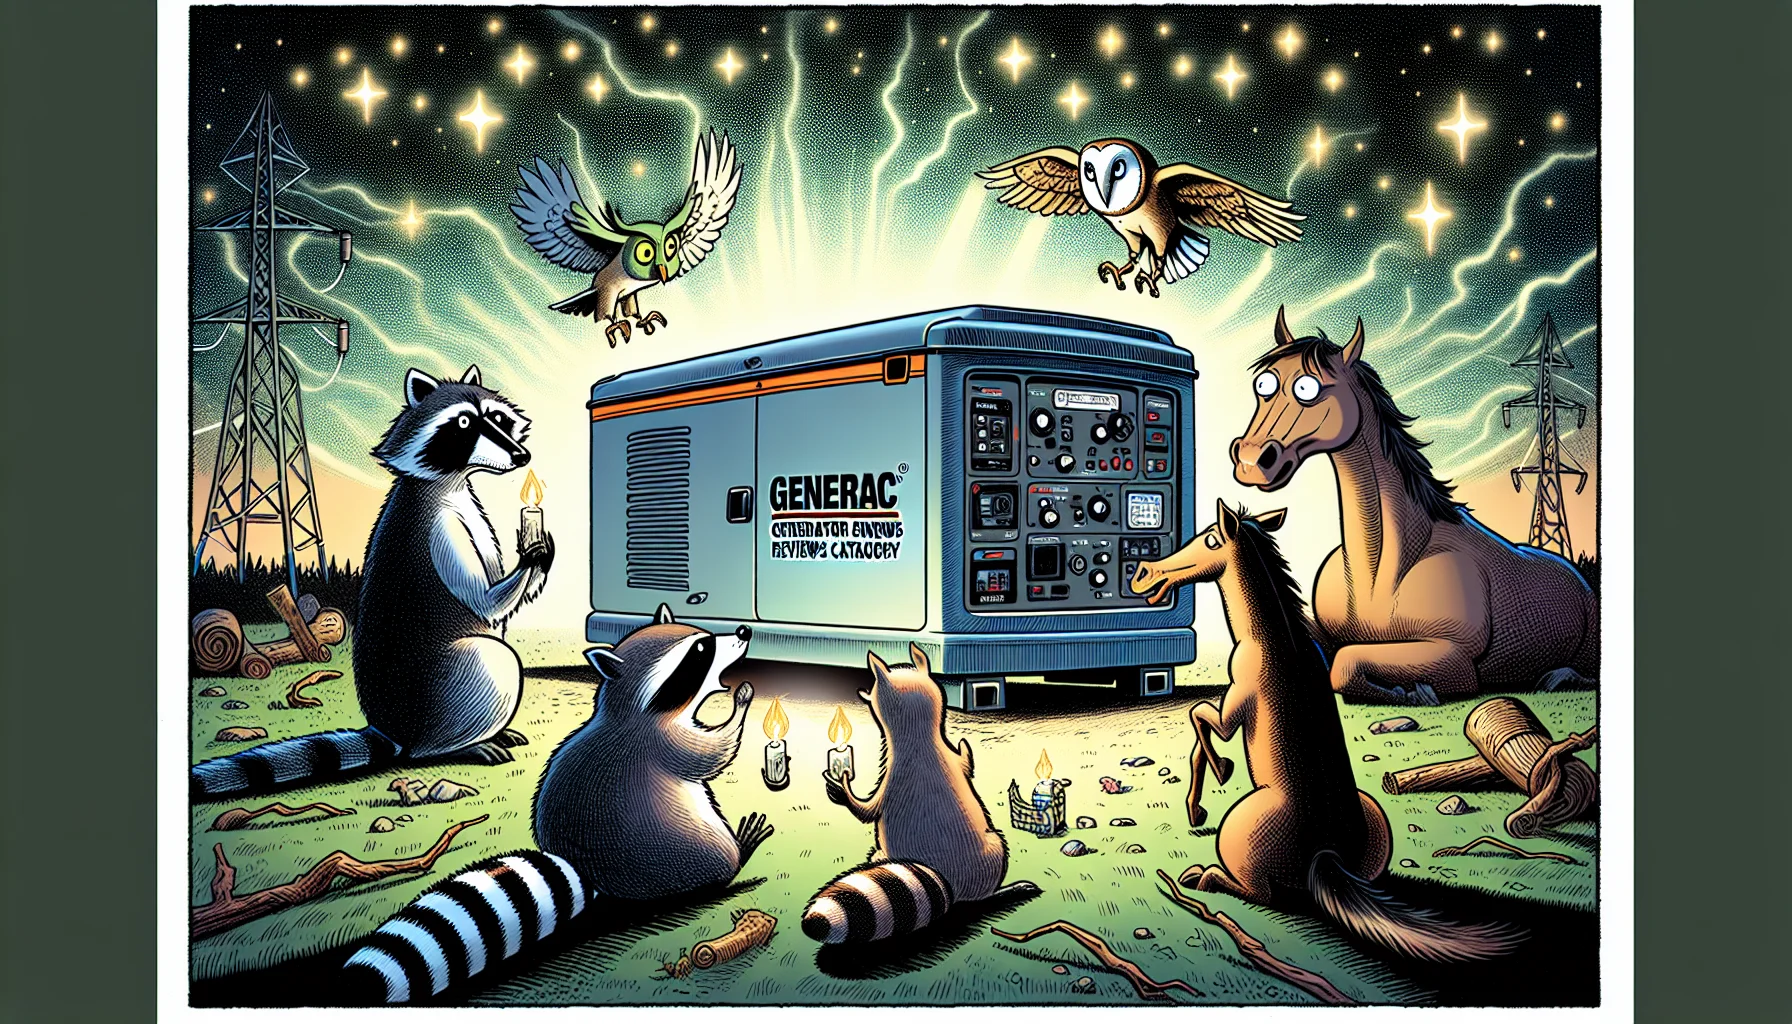 Imagine an offbeat scene concerning energy production: A comic panel portraying a light-hearted situation during a power outage, a large Generac generator sits at the center glowing with radiance. There are animal characters - a raccoon (signifying smartness), a horse (portraying power) and an owl (personifying wisdom) engaged in a playful conversation. They are humorously depicting the importance and efficiency of the generator in their own animal language. The words 'Generac Generator Reviews Category' are twinkling in bold above the generator. The environment brings to light the blend of technology with nature and the humor element makes it enticing.